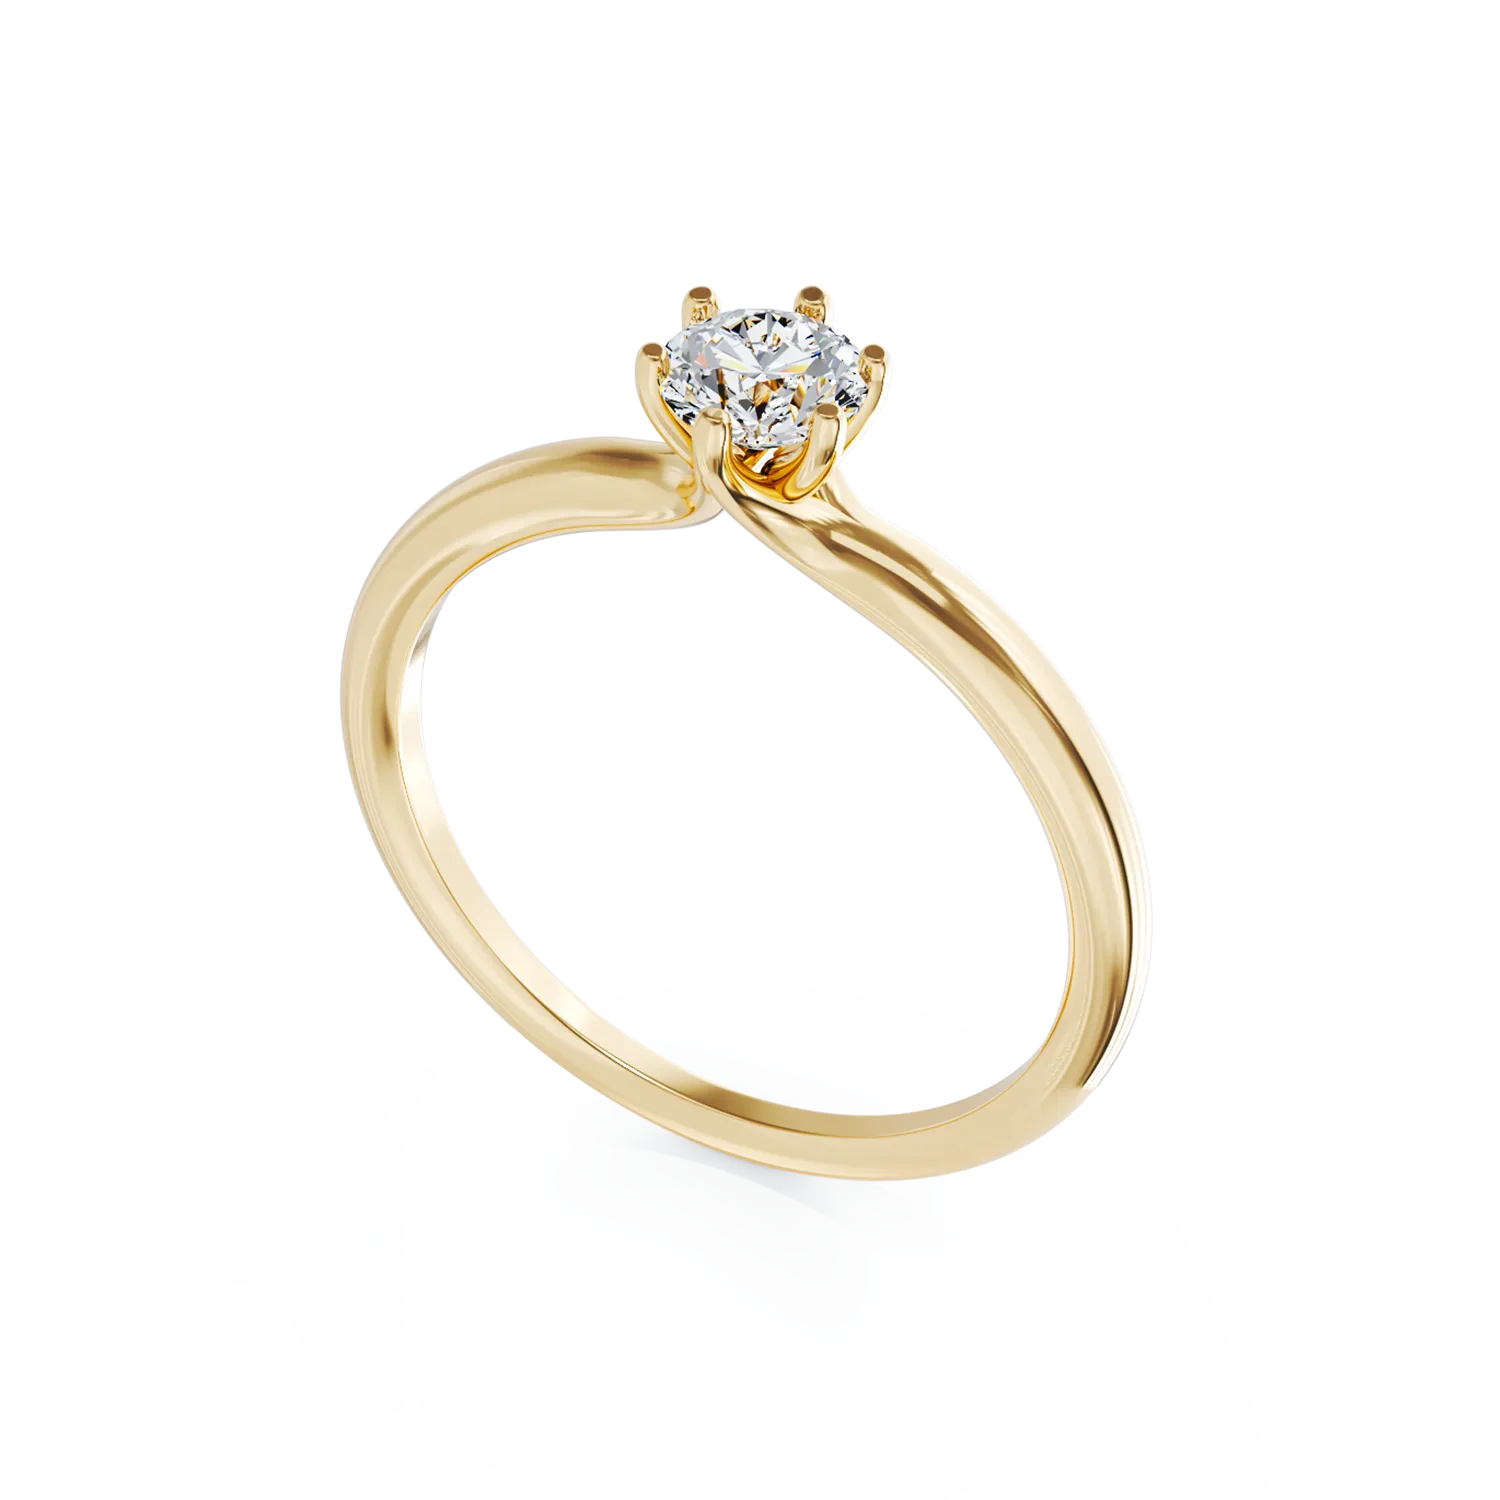 18K white gold engagement ring with a 0.31ct solitaire diamond